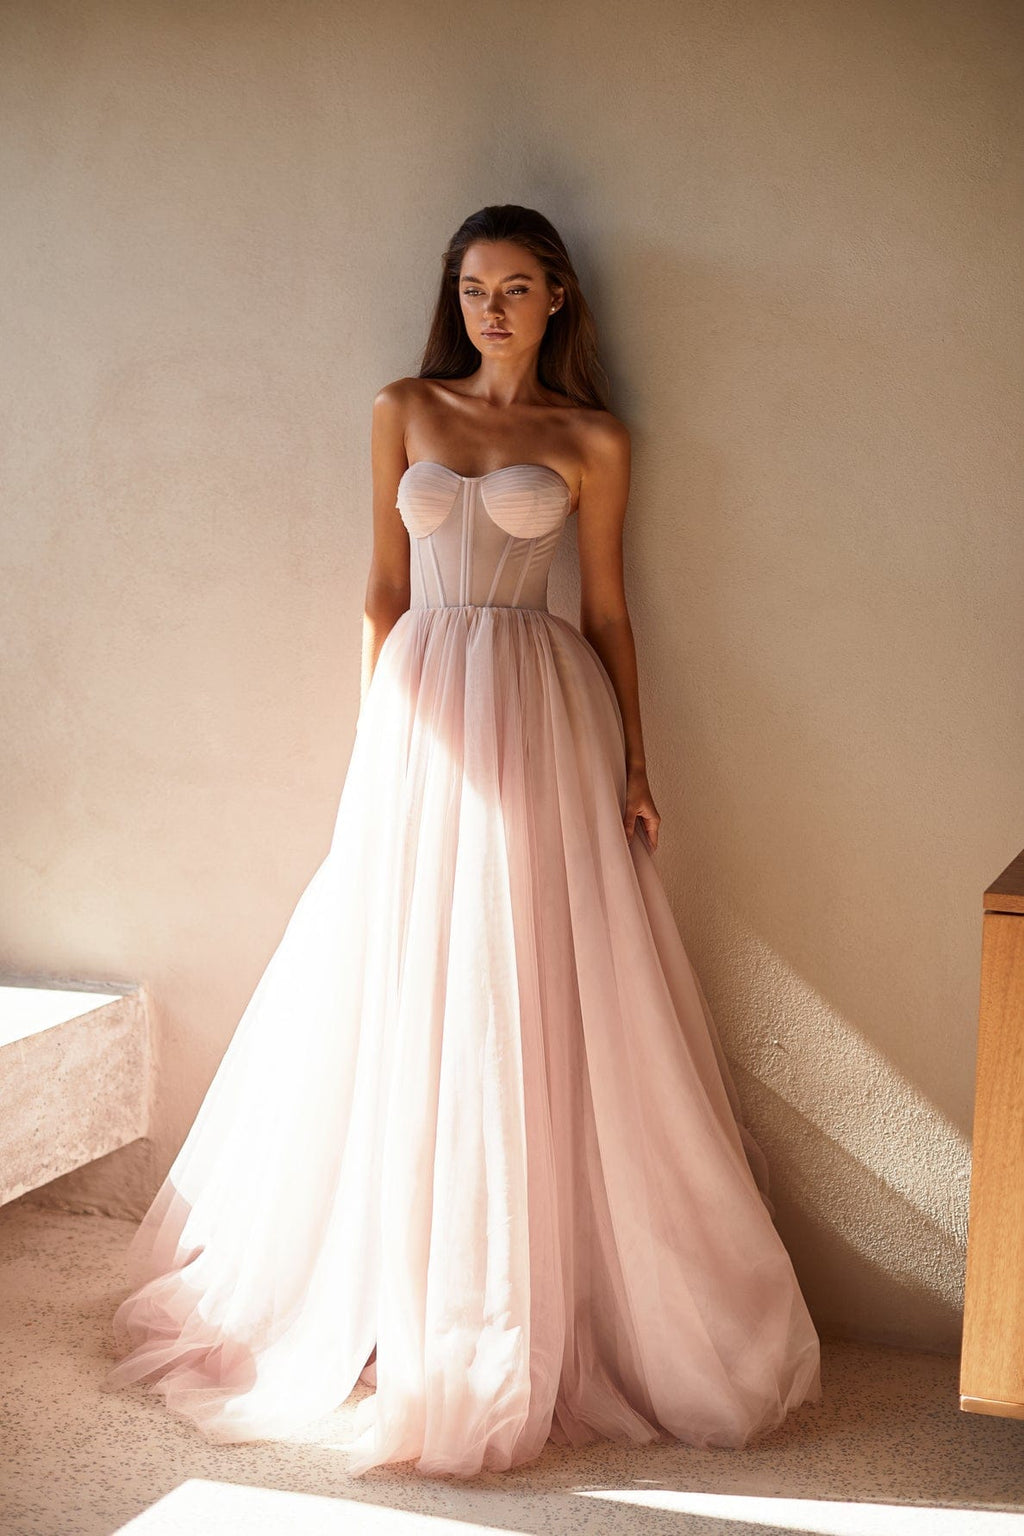 Misty Rose Tulle Maxi Dress with a Corset Bustier - Milla